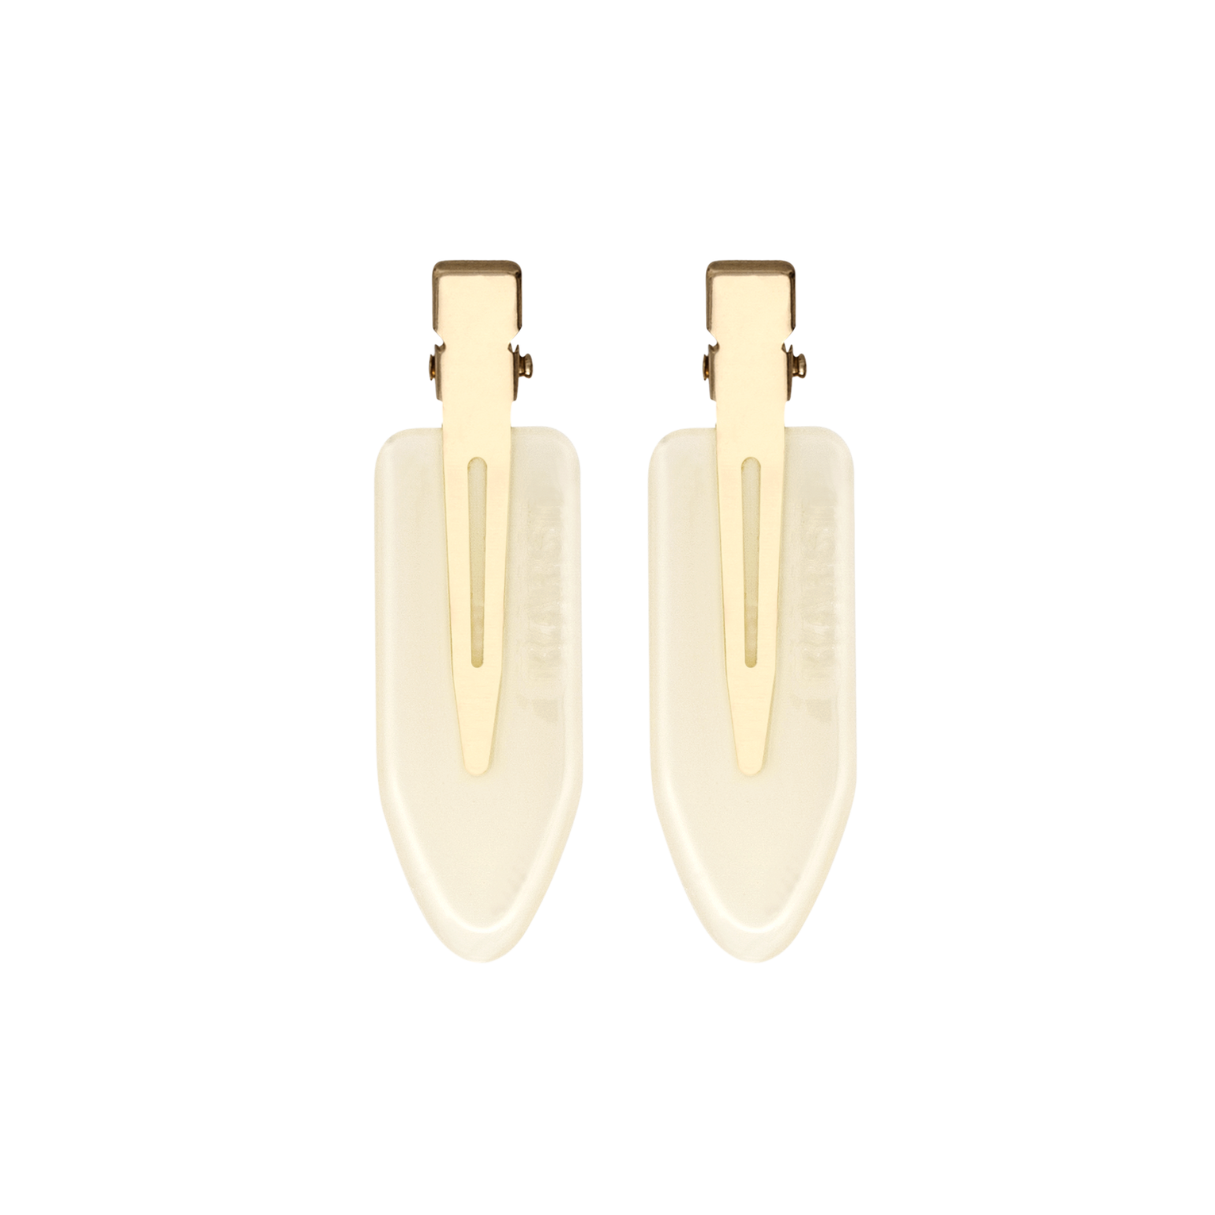 The Creaseless Clips in Cream (Set of 2)